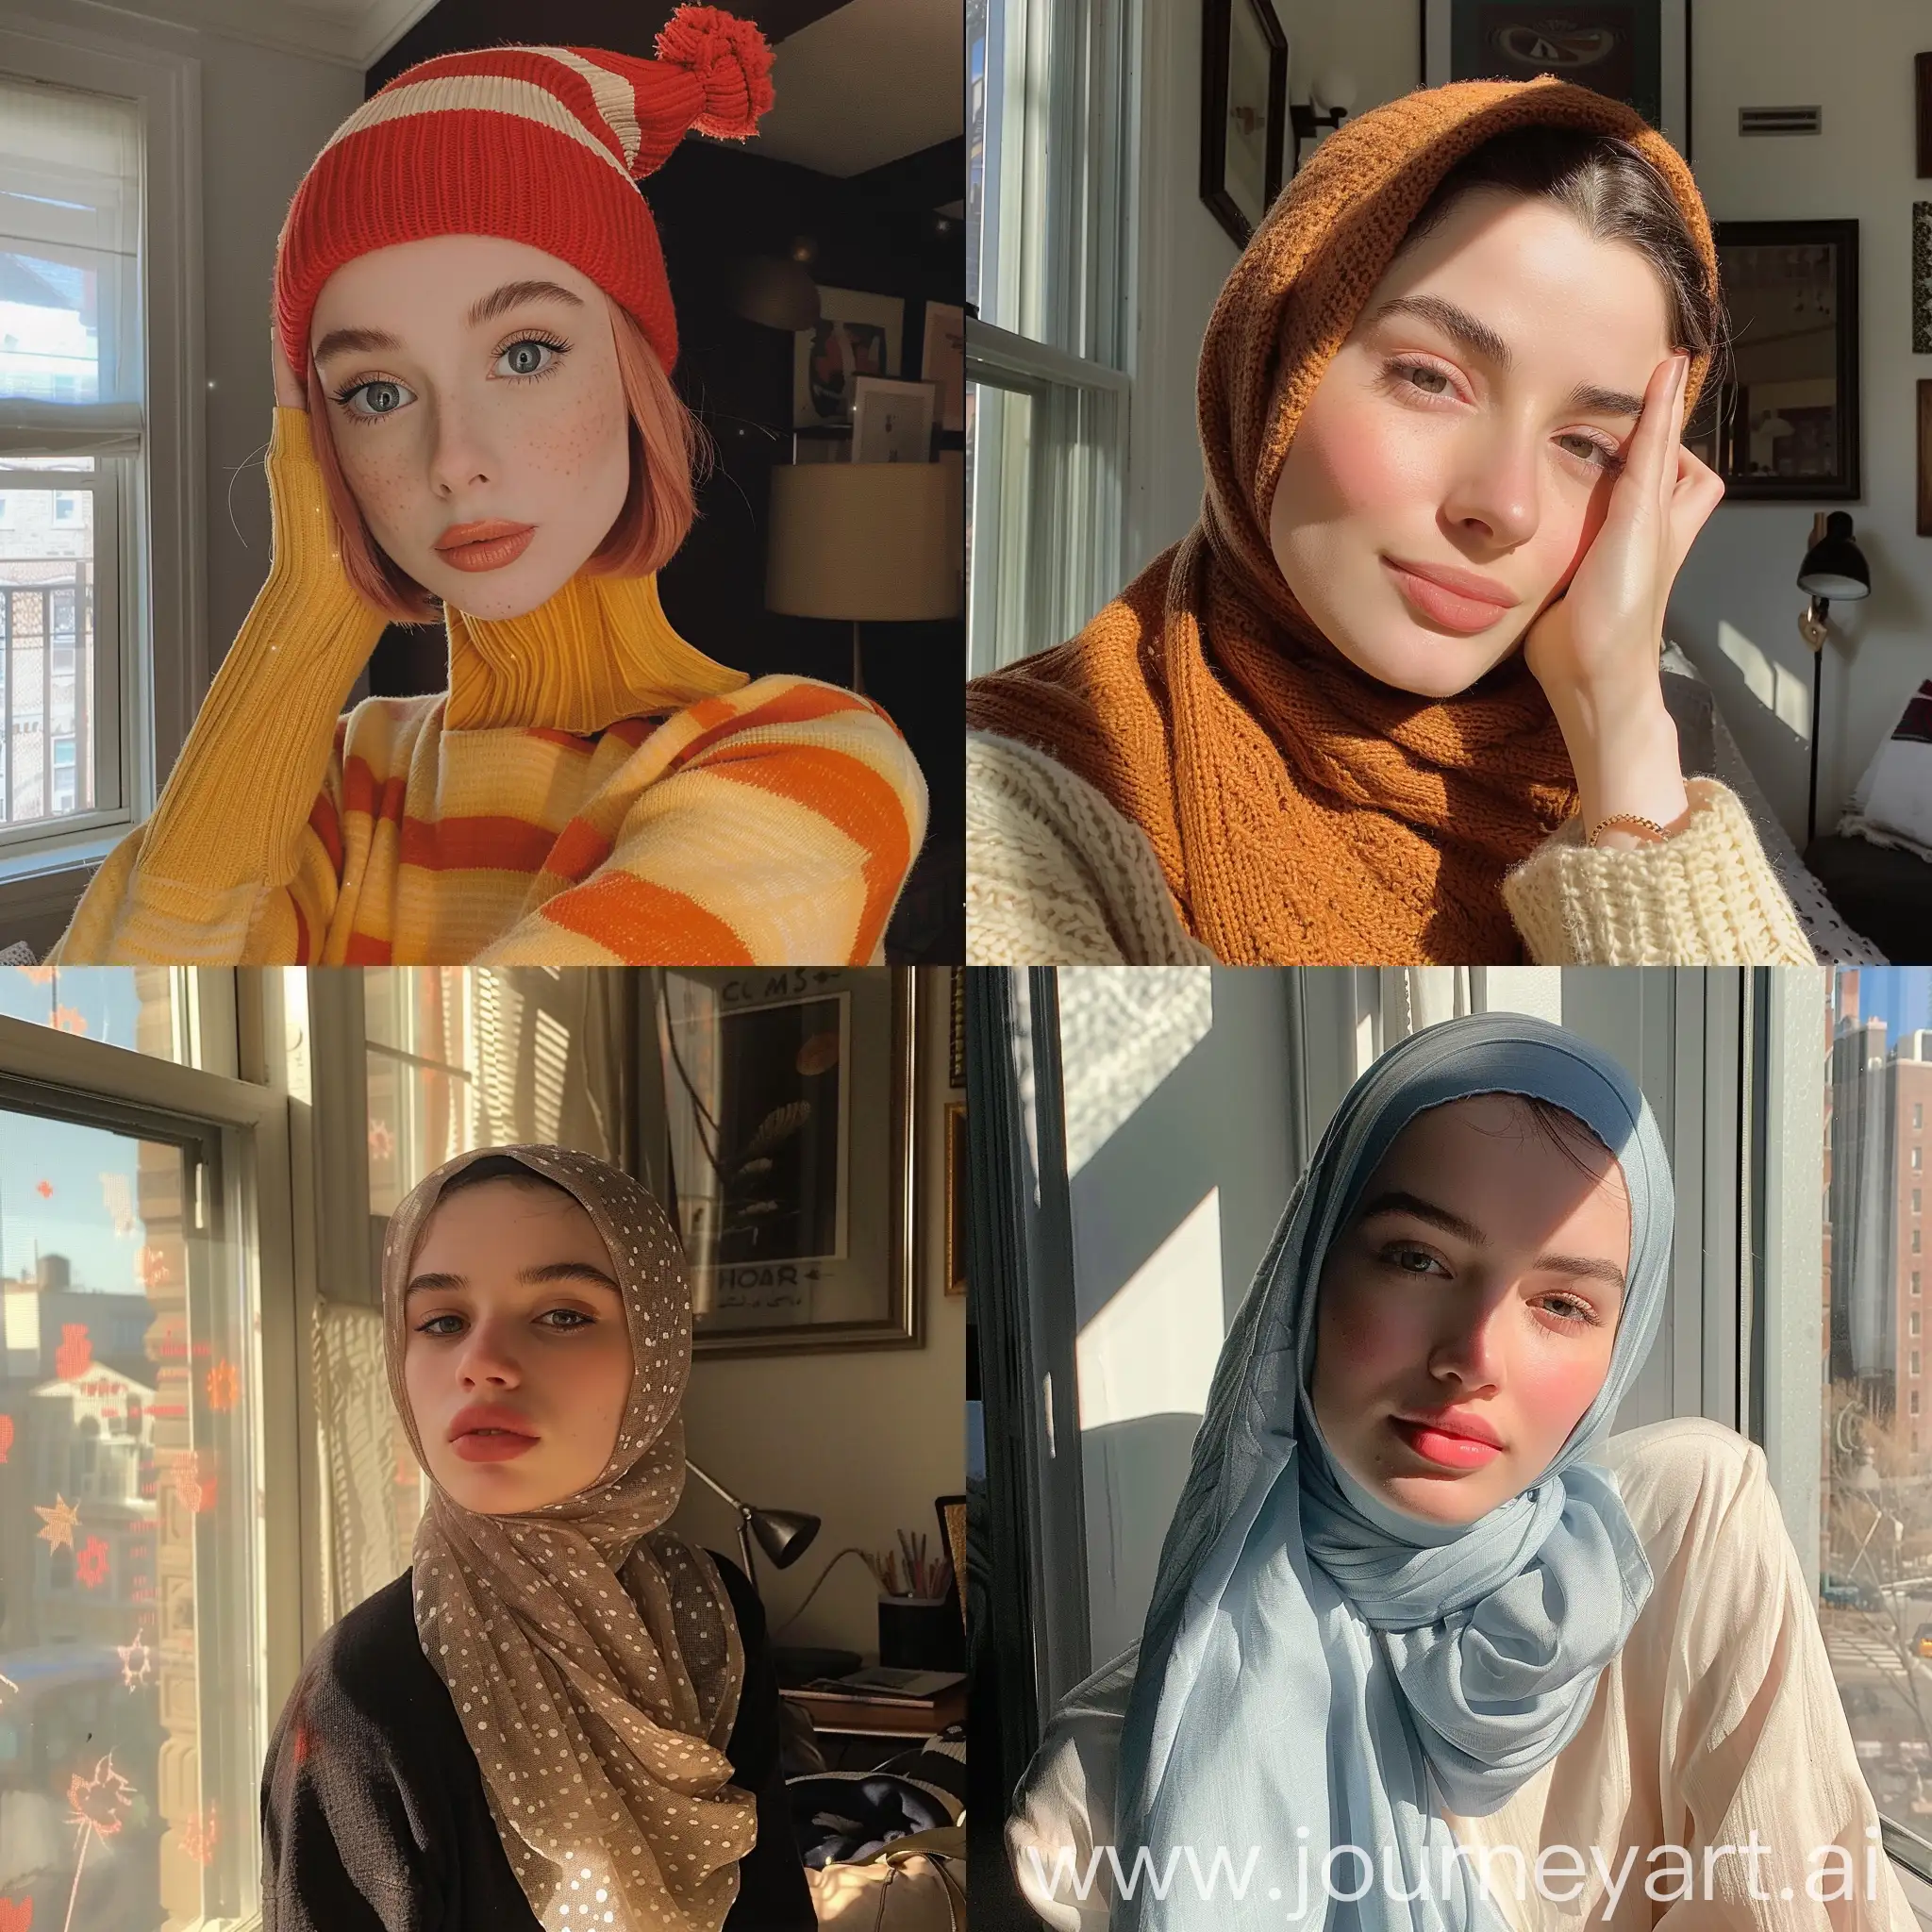 Aesthetic Instagram selfie of Sally from the Cat in the Hat movie, adorable, girl hijab, cute, NYC apartment -